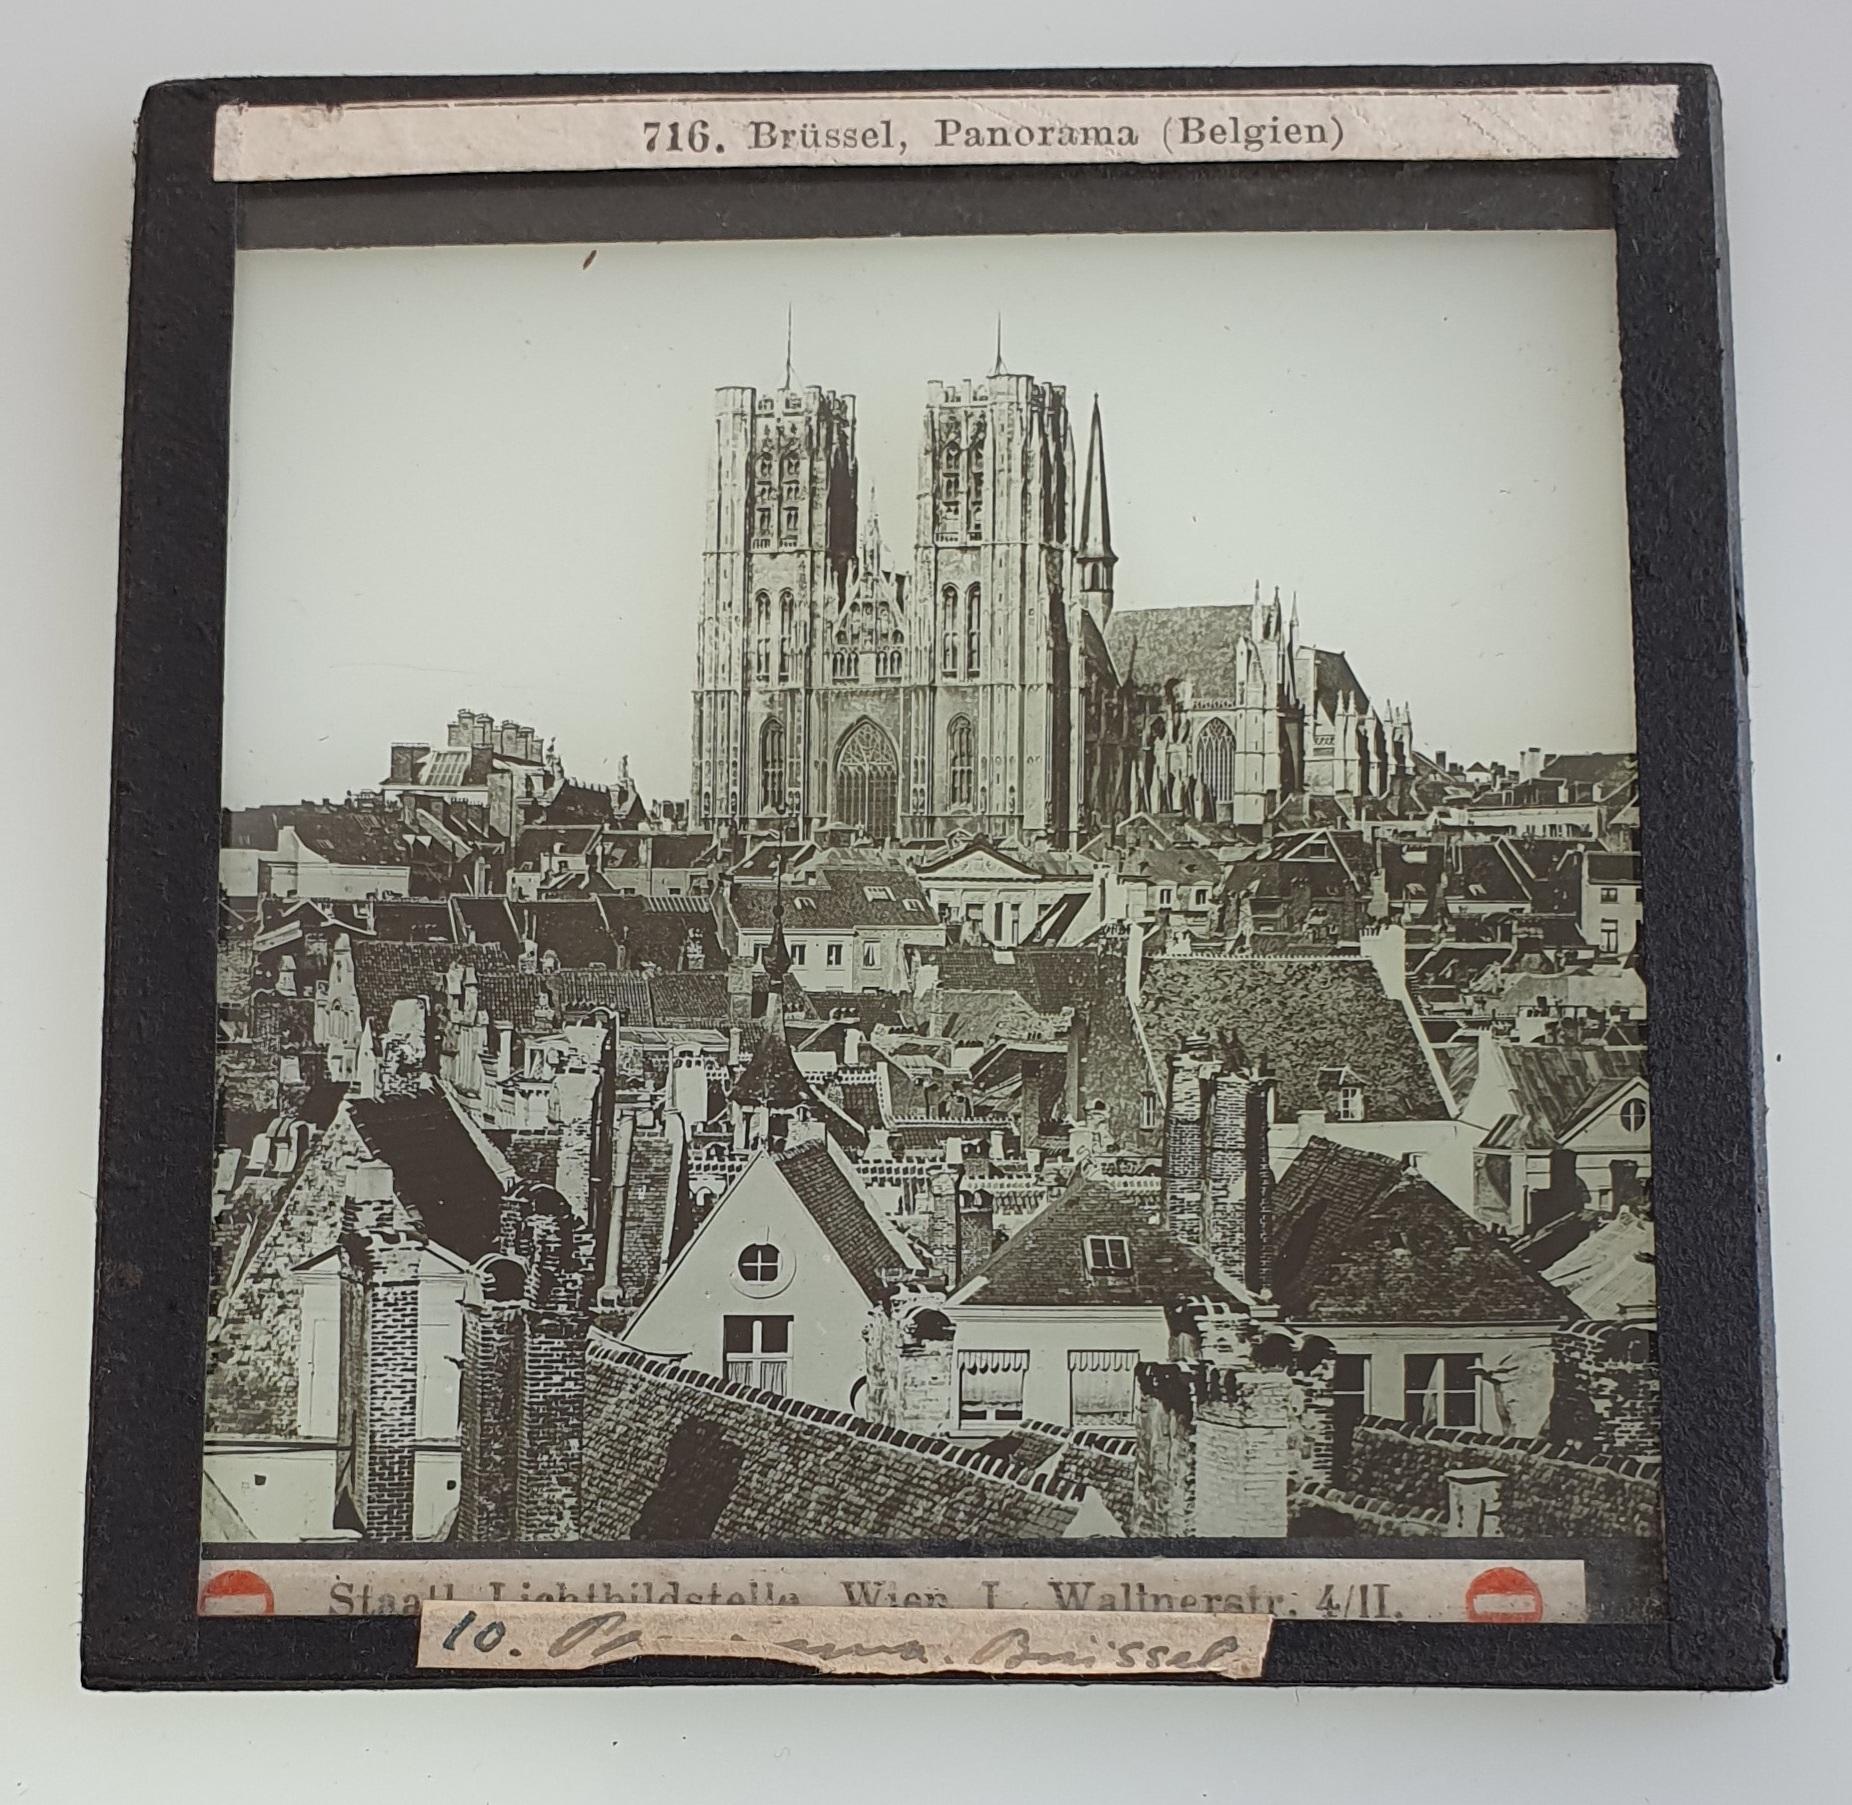 7 Antique glass lantern slides with motifs of Belgium.

1. Brussels, panorama
2. Bussels, Grand Palace, portraying people on the central square
3. Brussels, Town Hall
4. Ostende, 